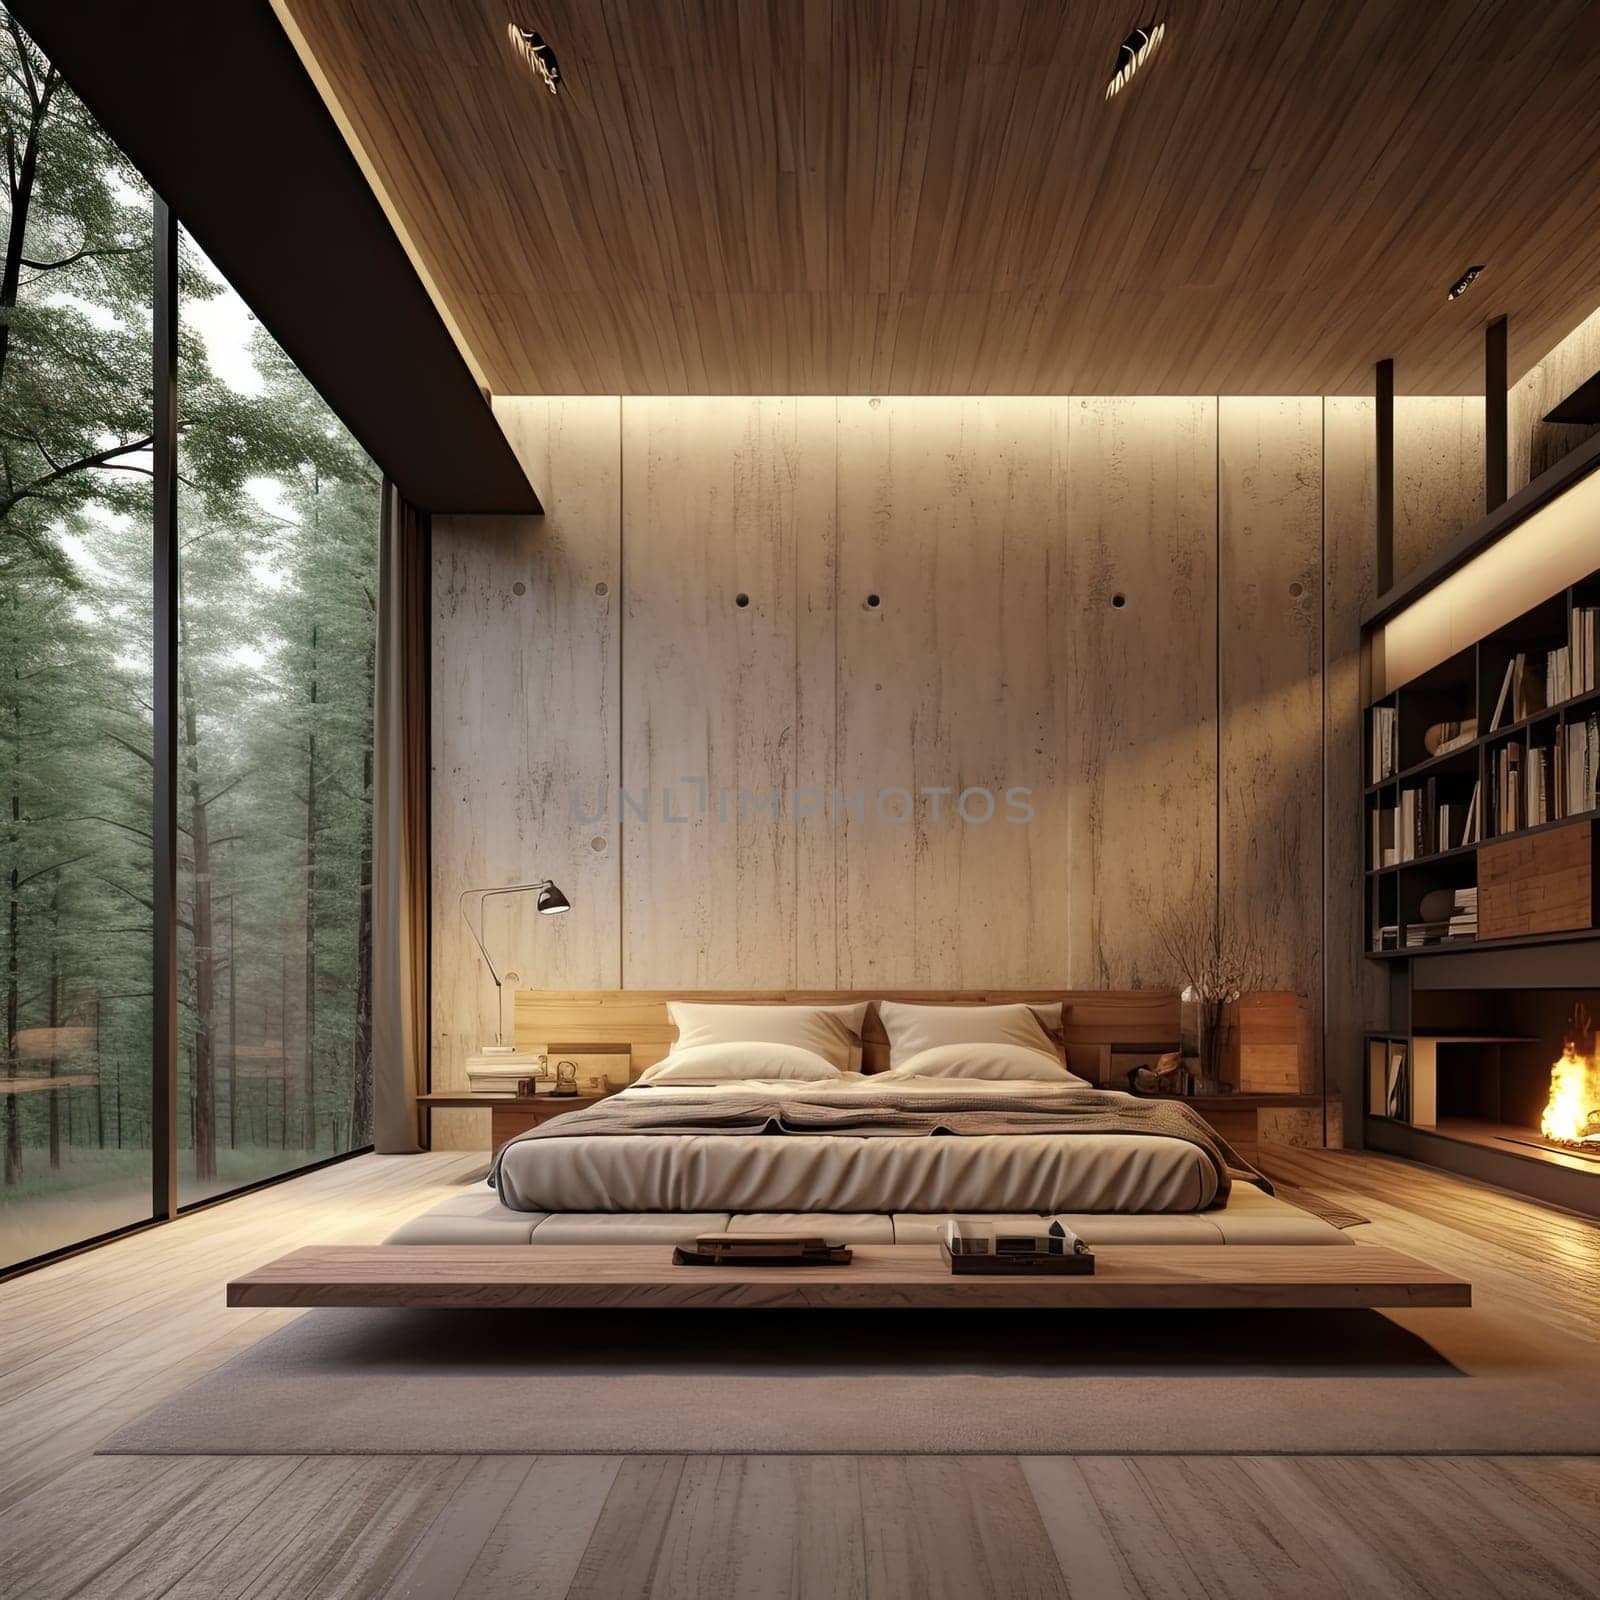 Interior of a modern luxurious bedroom with wooden furniture in a tropical place surrounded by nature.